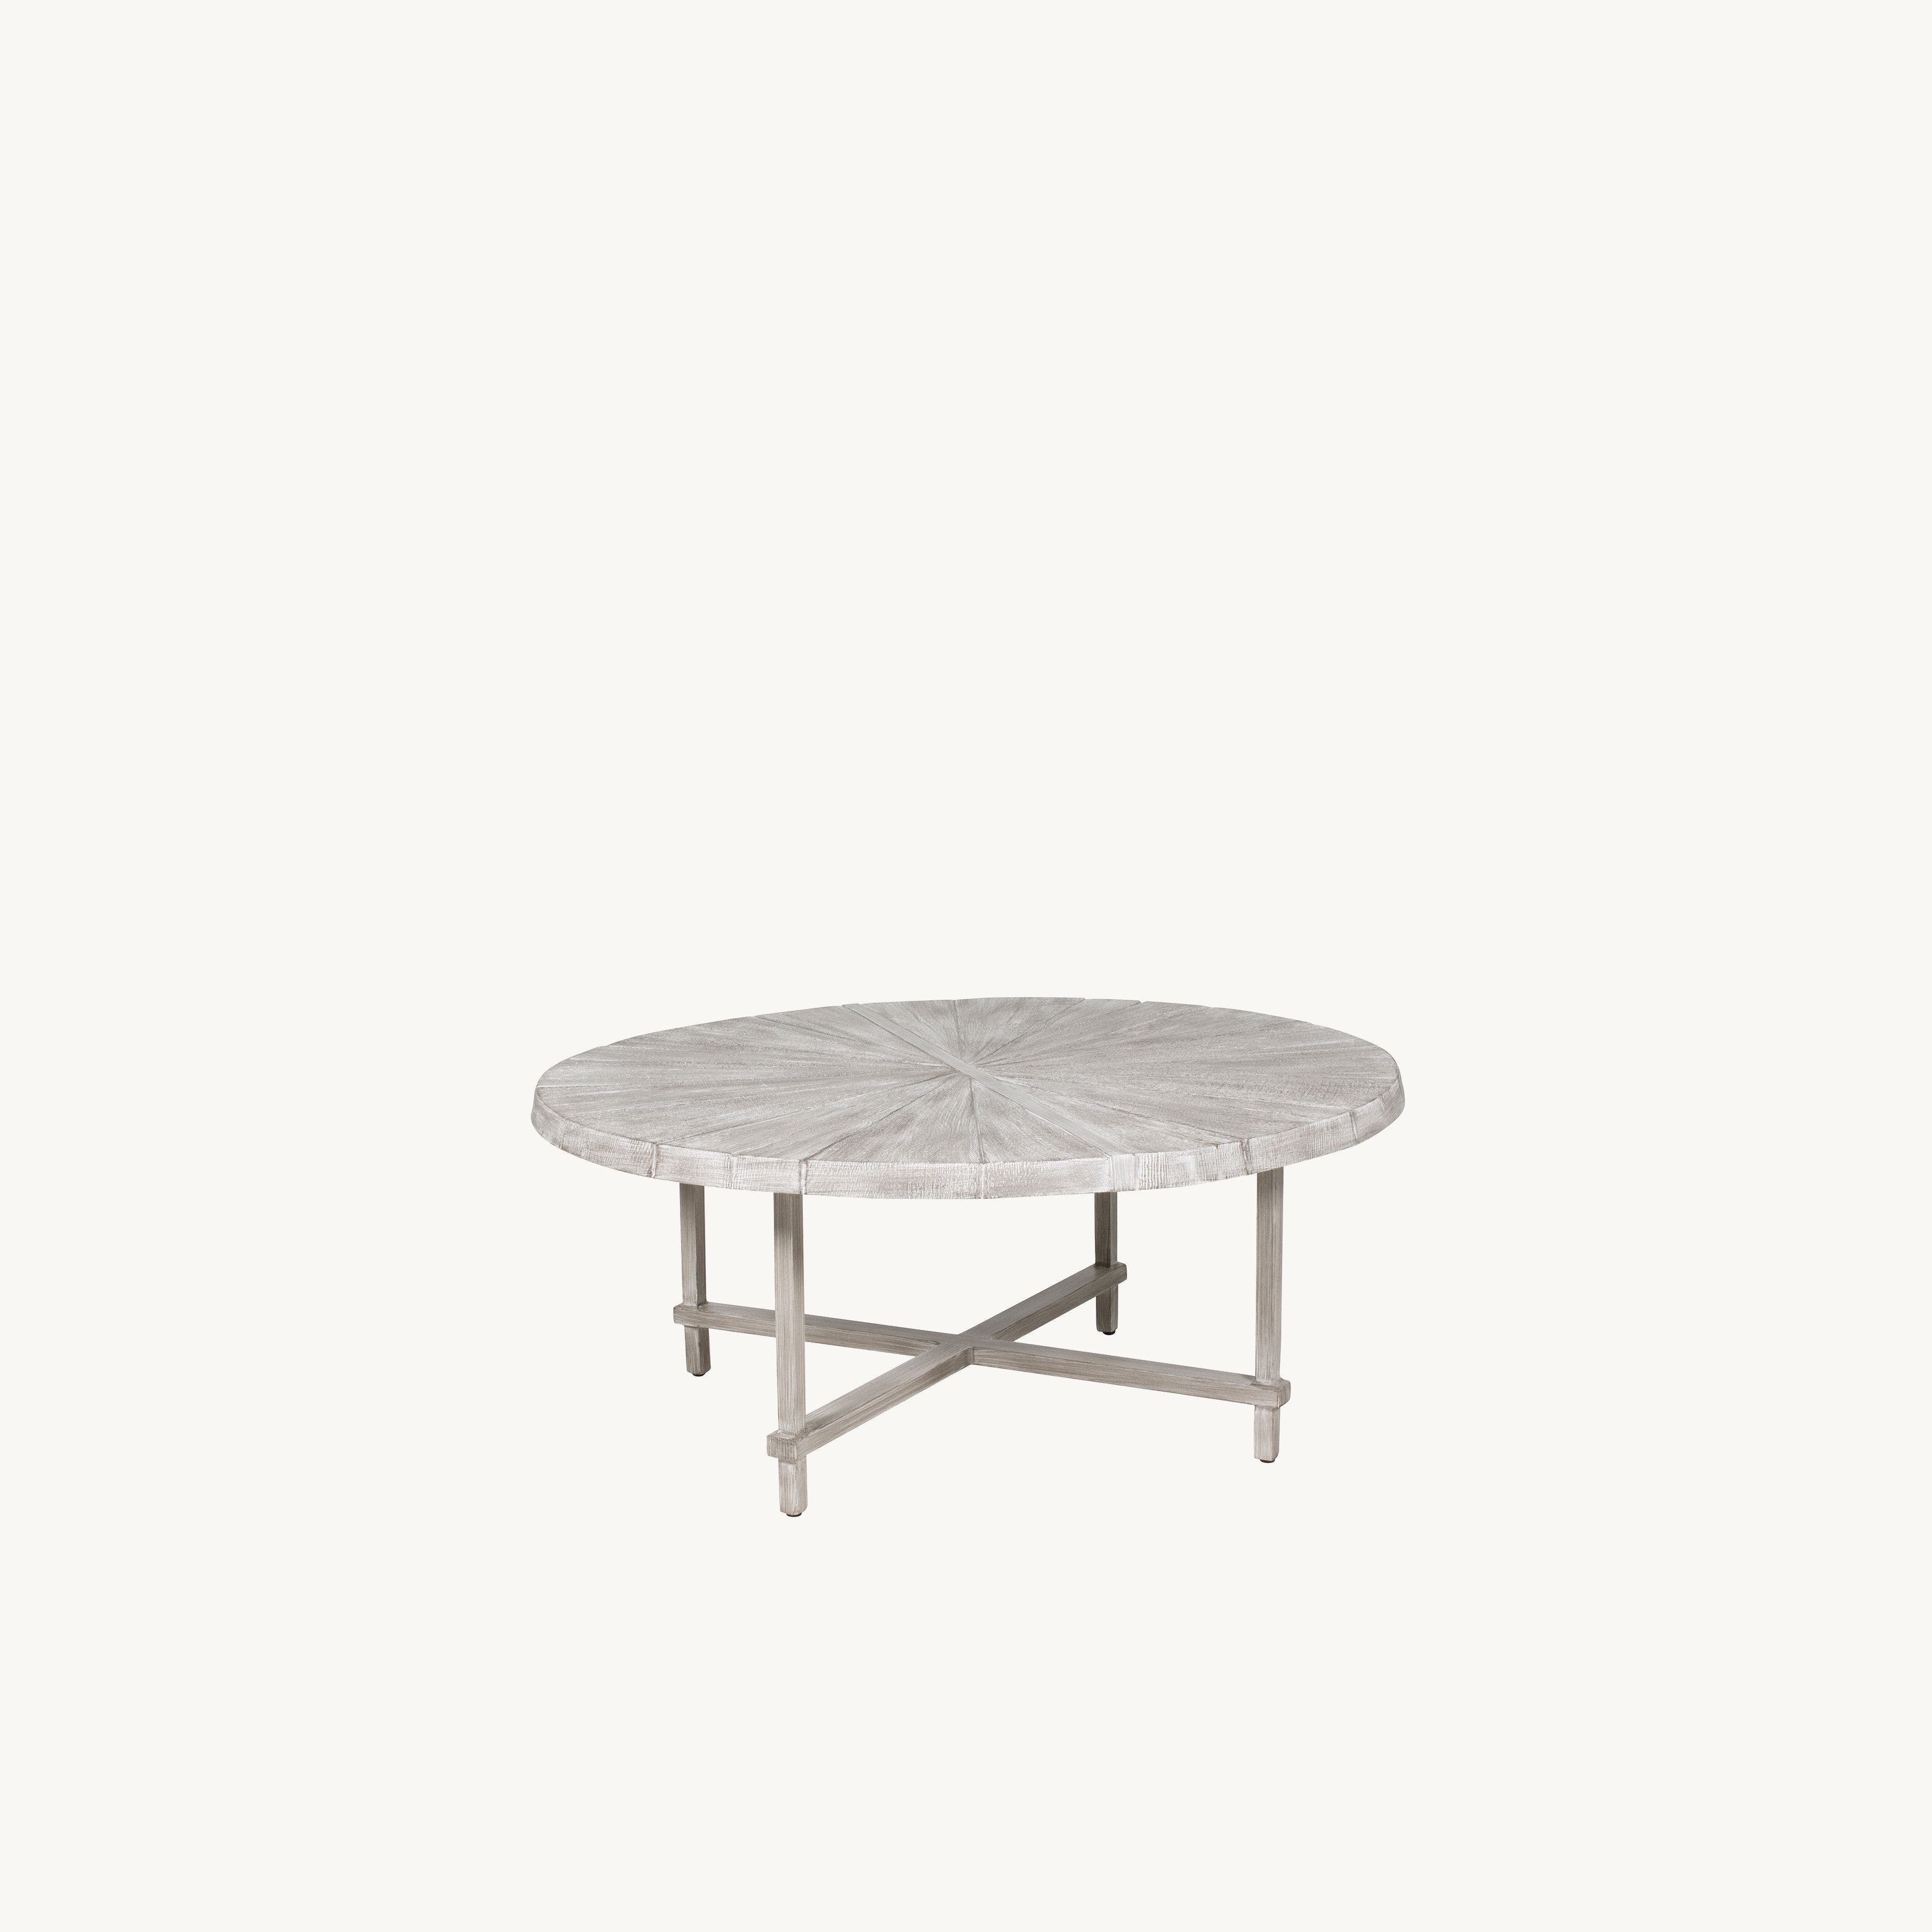 Antler Hill 42" Round Chat Table By Castelle